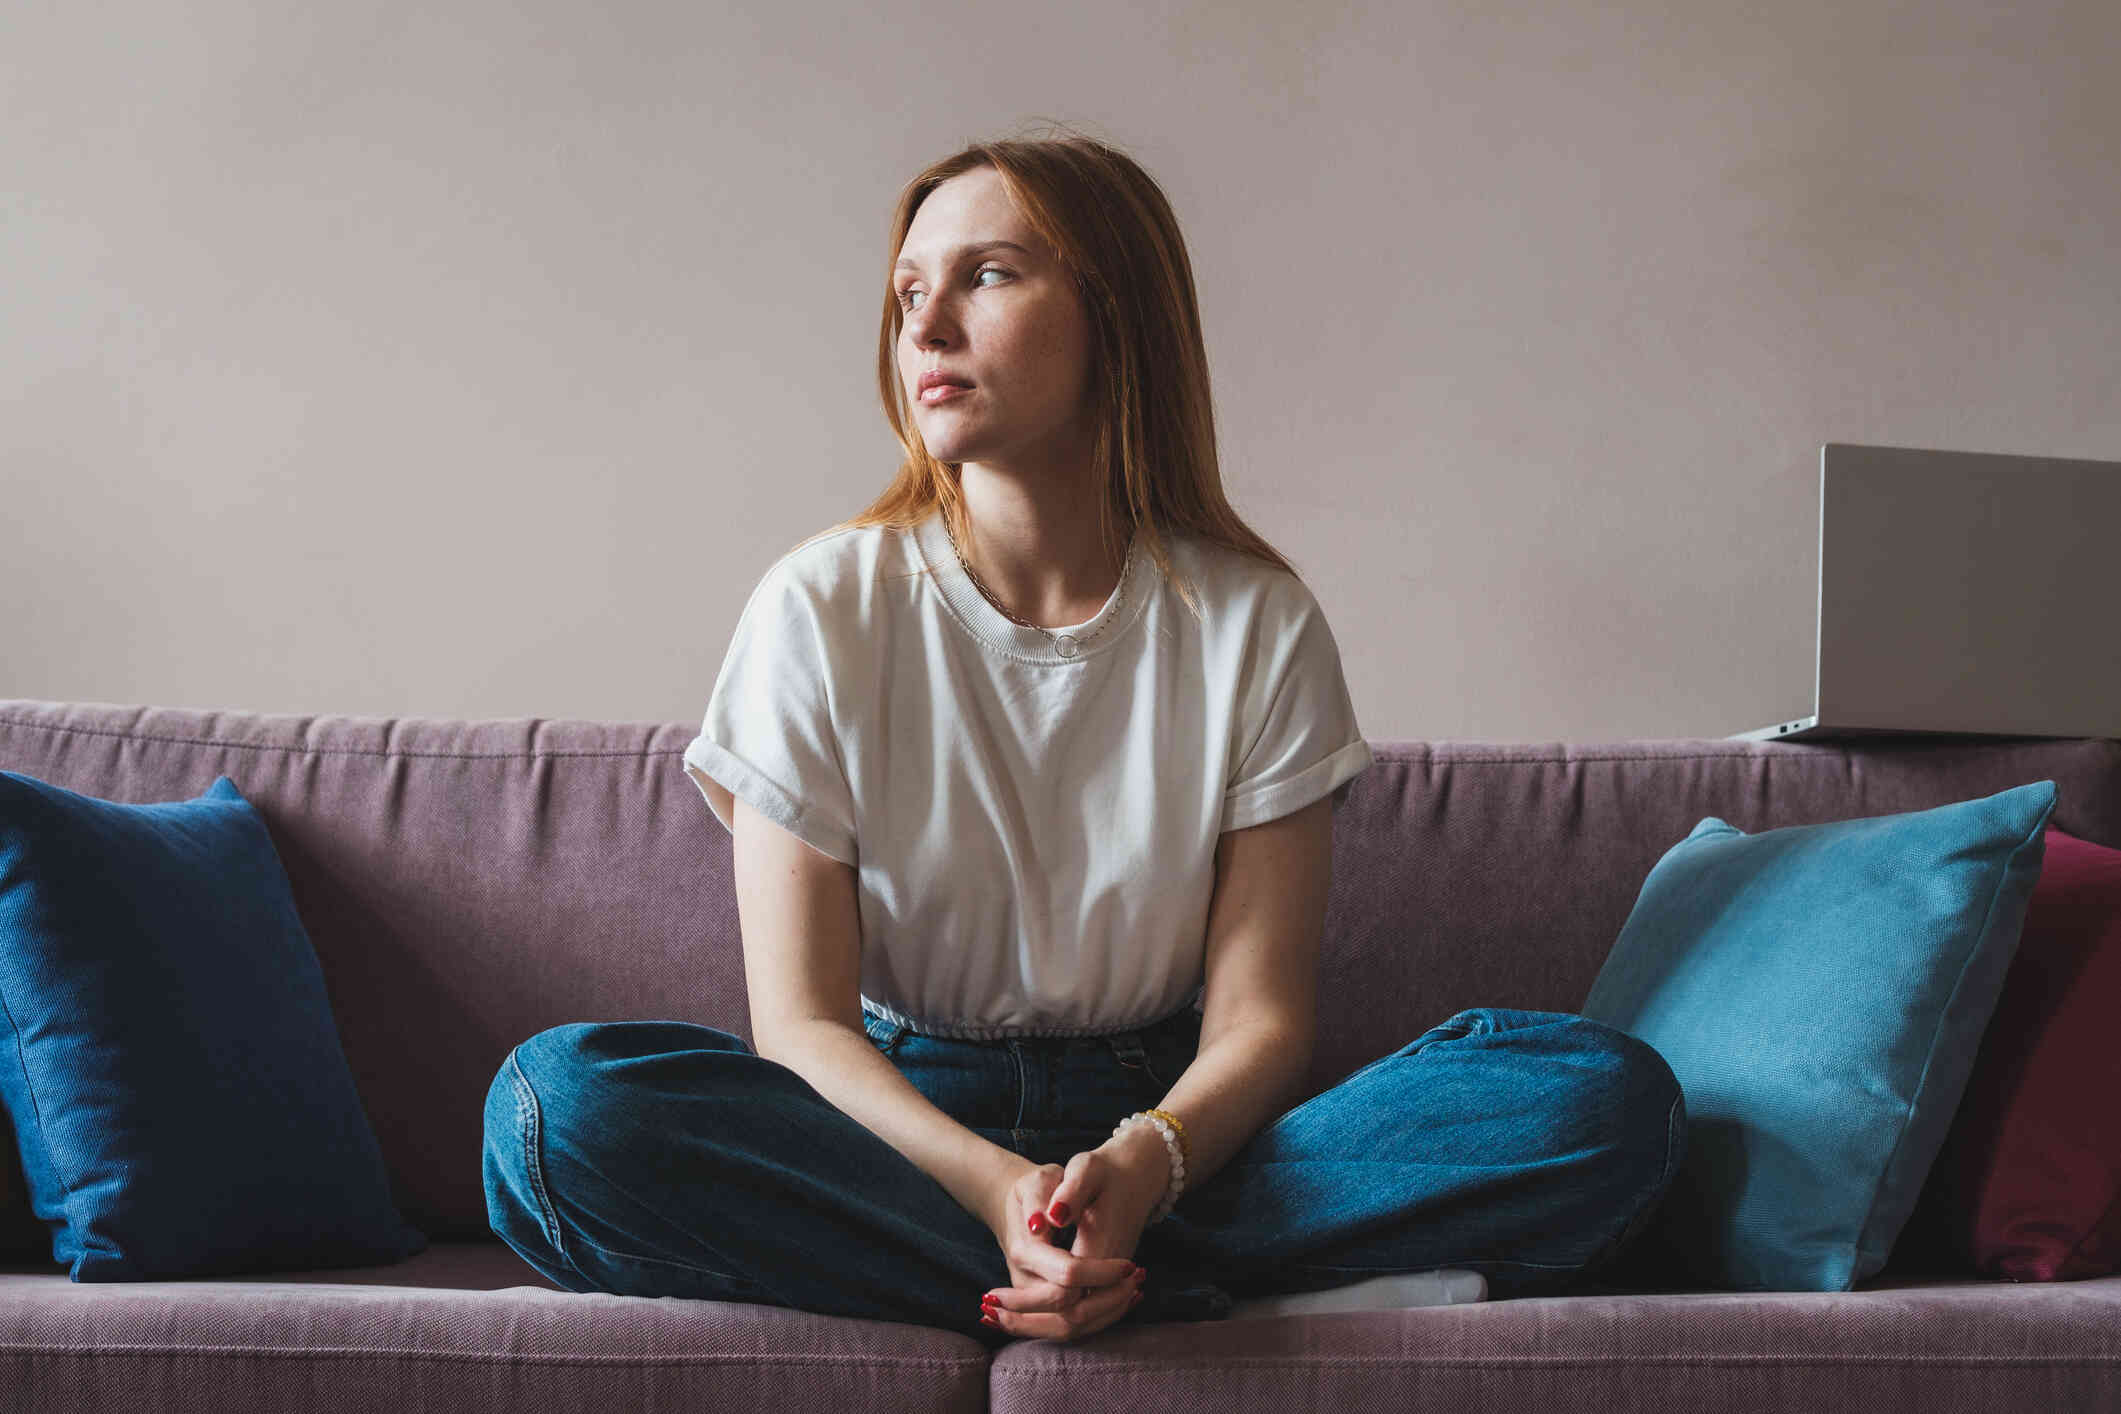 A woman in a white shirt sits cross legged on the couch and gazes off with a sad expression.